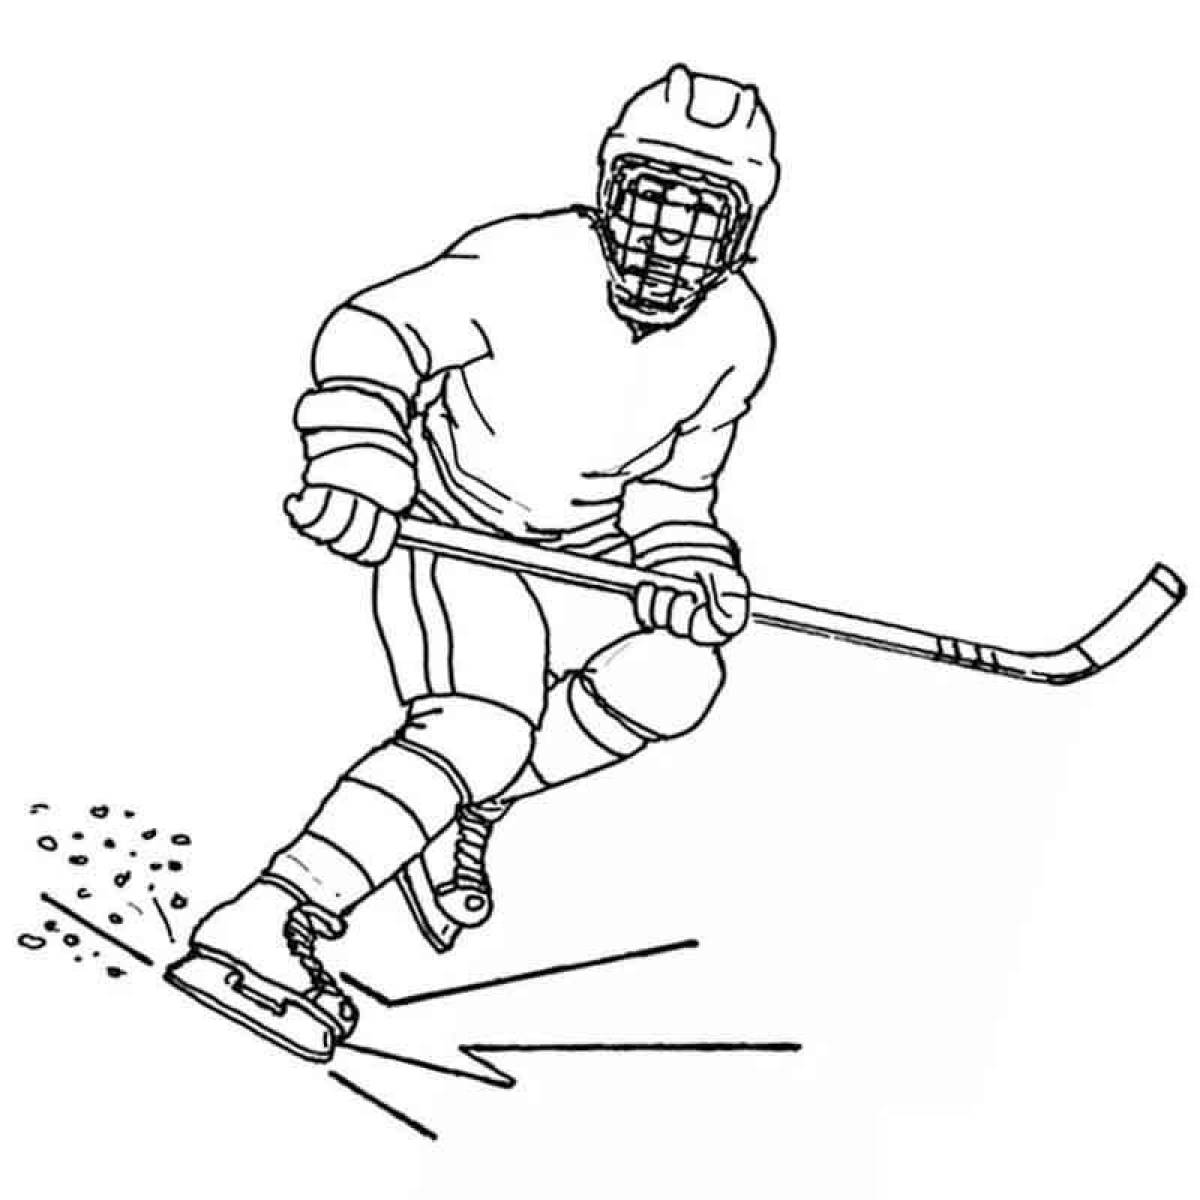 Adorable hockey player coloring page for kids